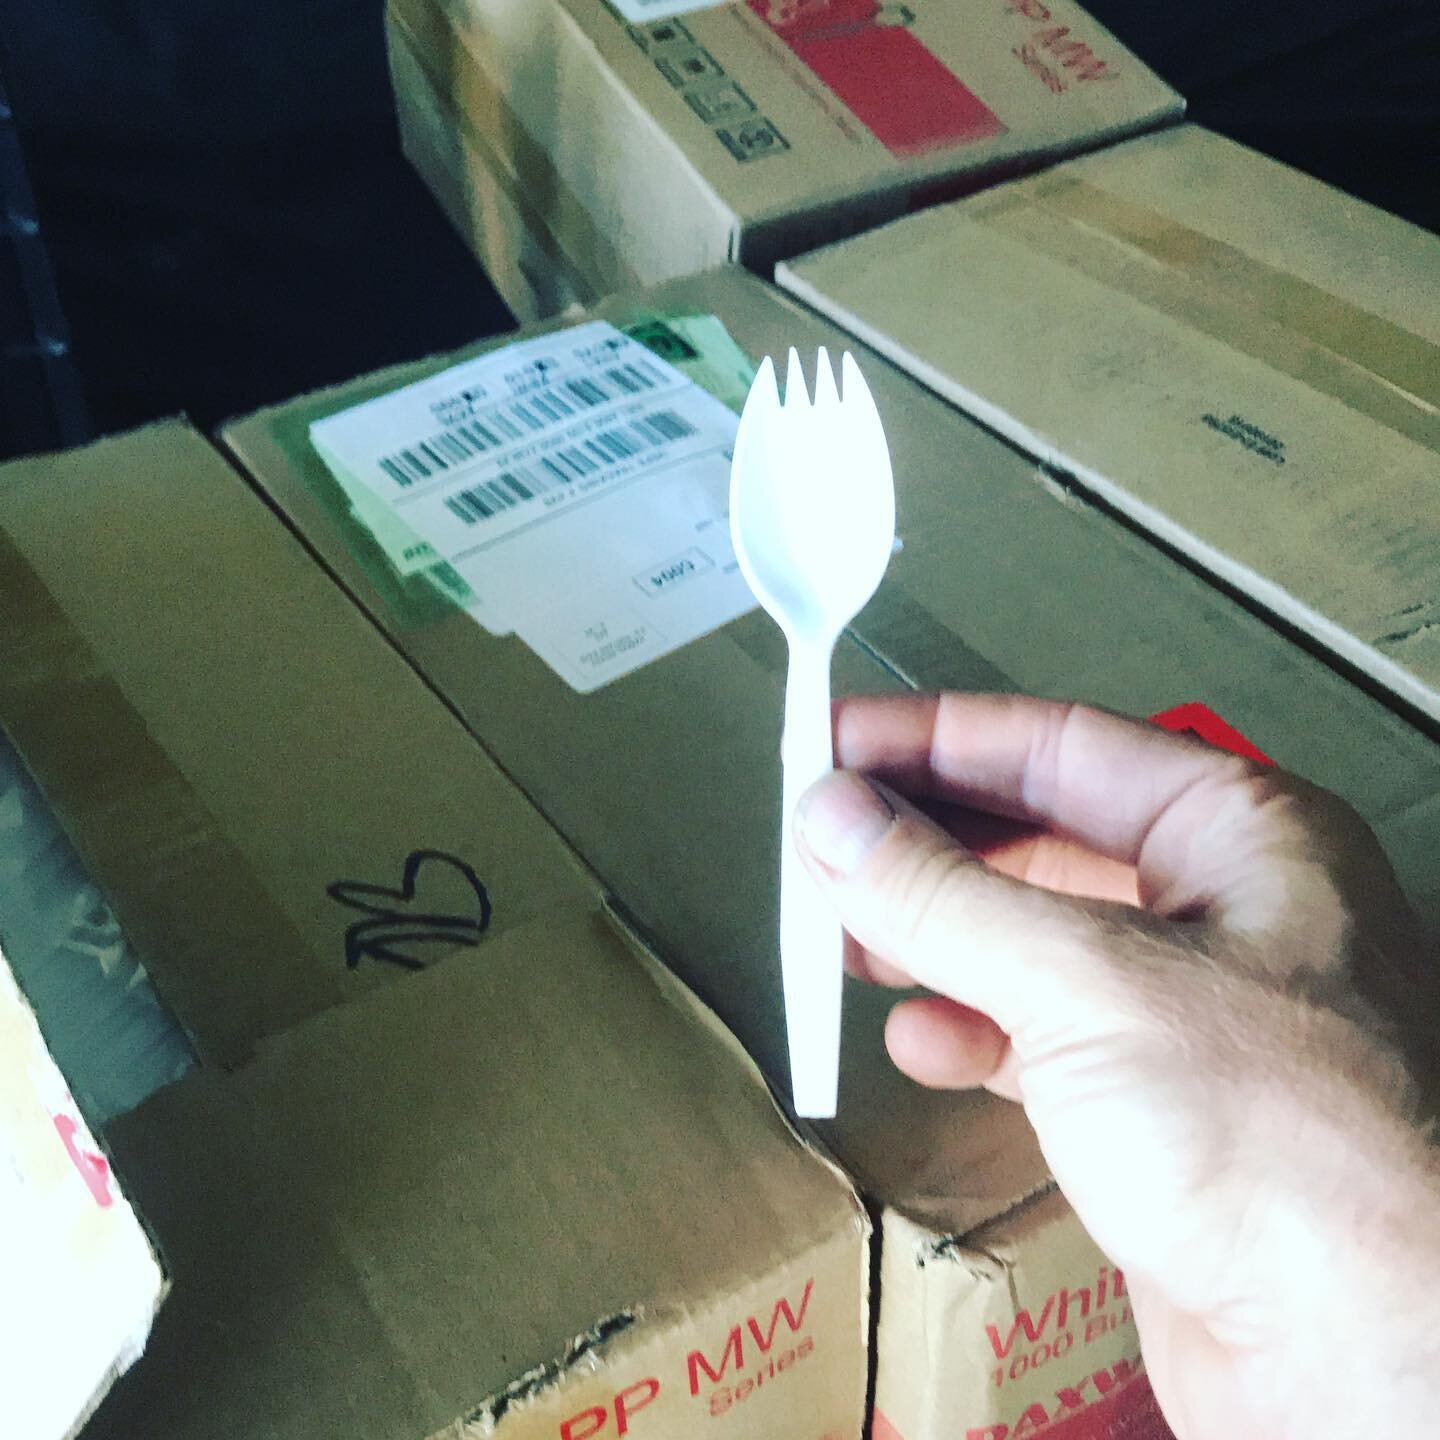 Some of you were worried about our Spork numbers.... we are restocked. #4000more